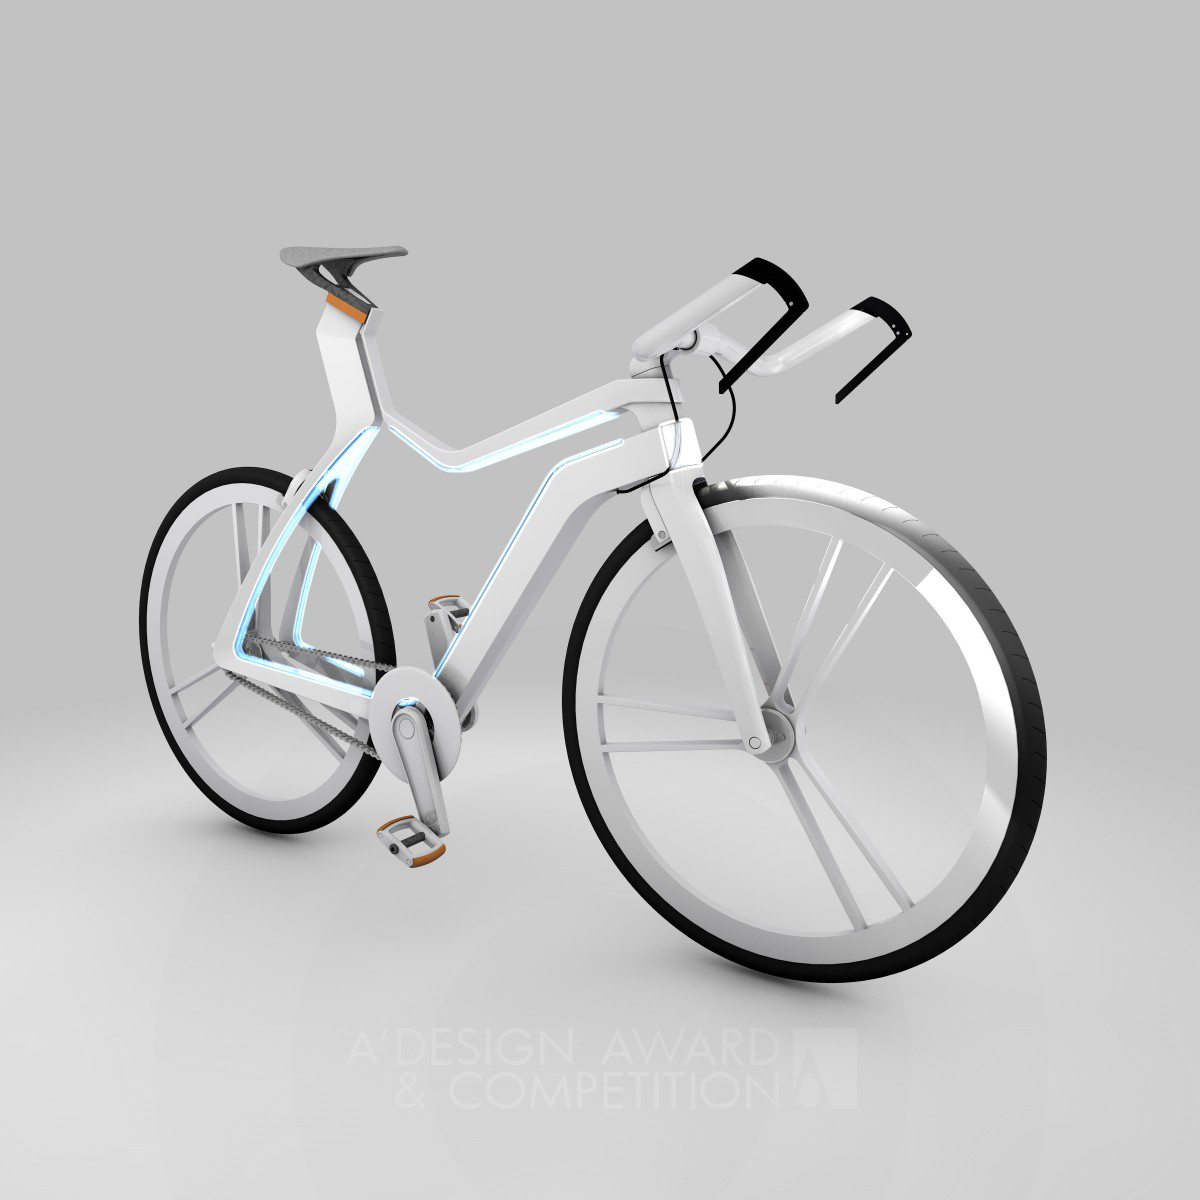 Silence Electric Bicycle by Yi-Sin Huang